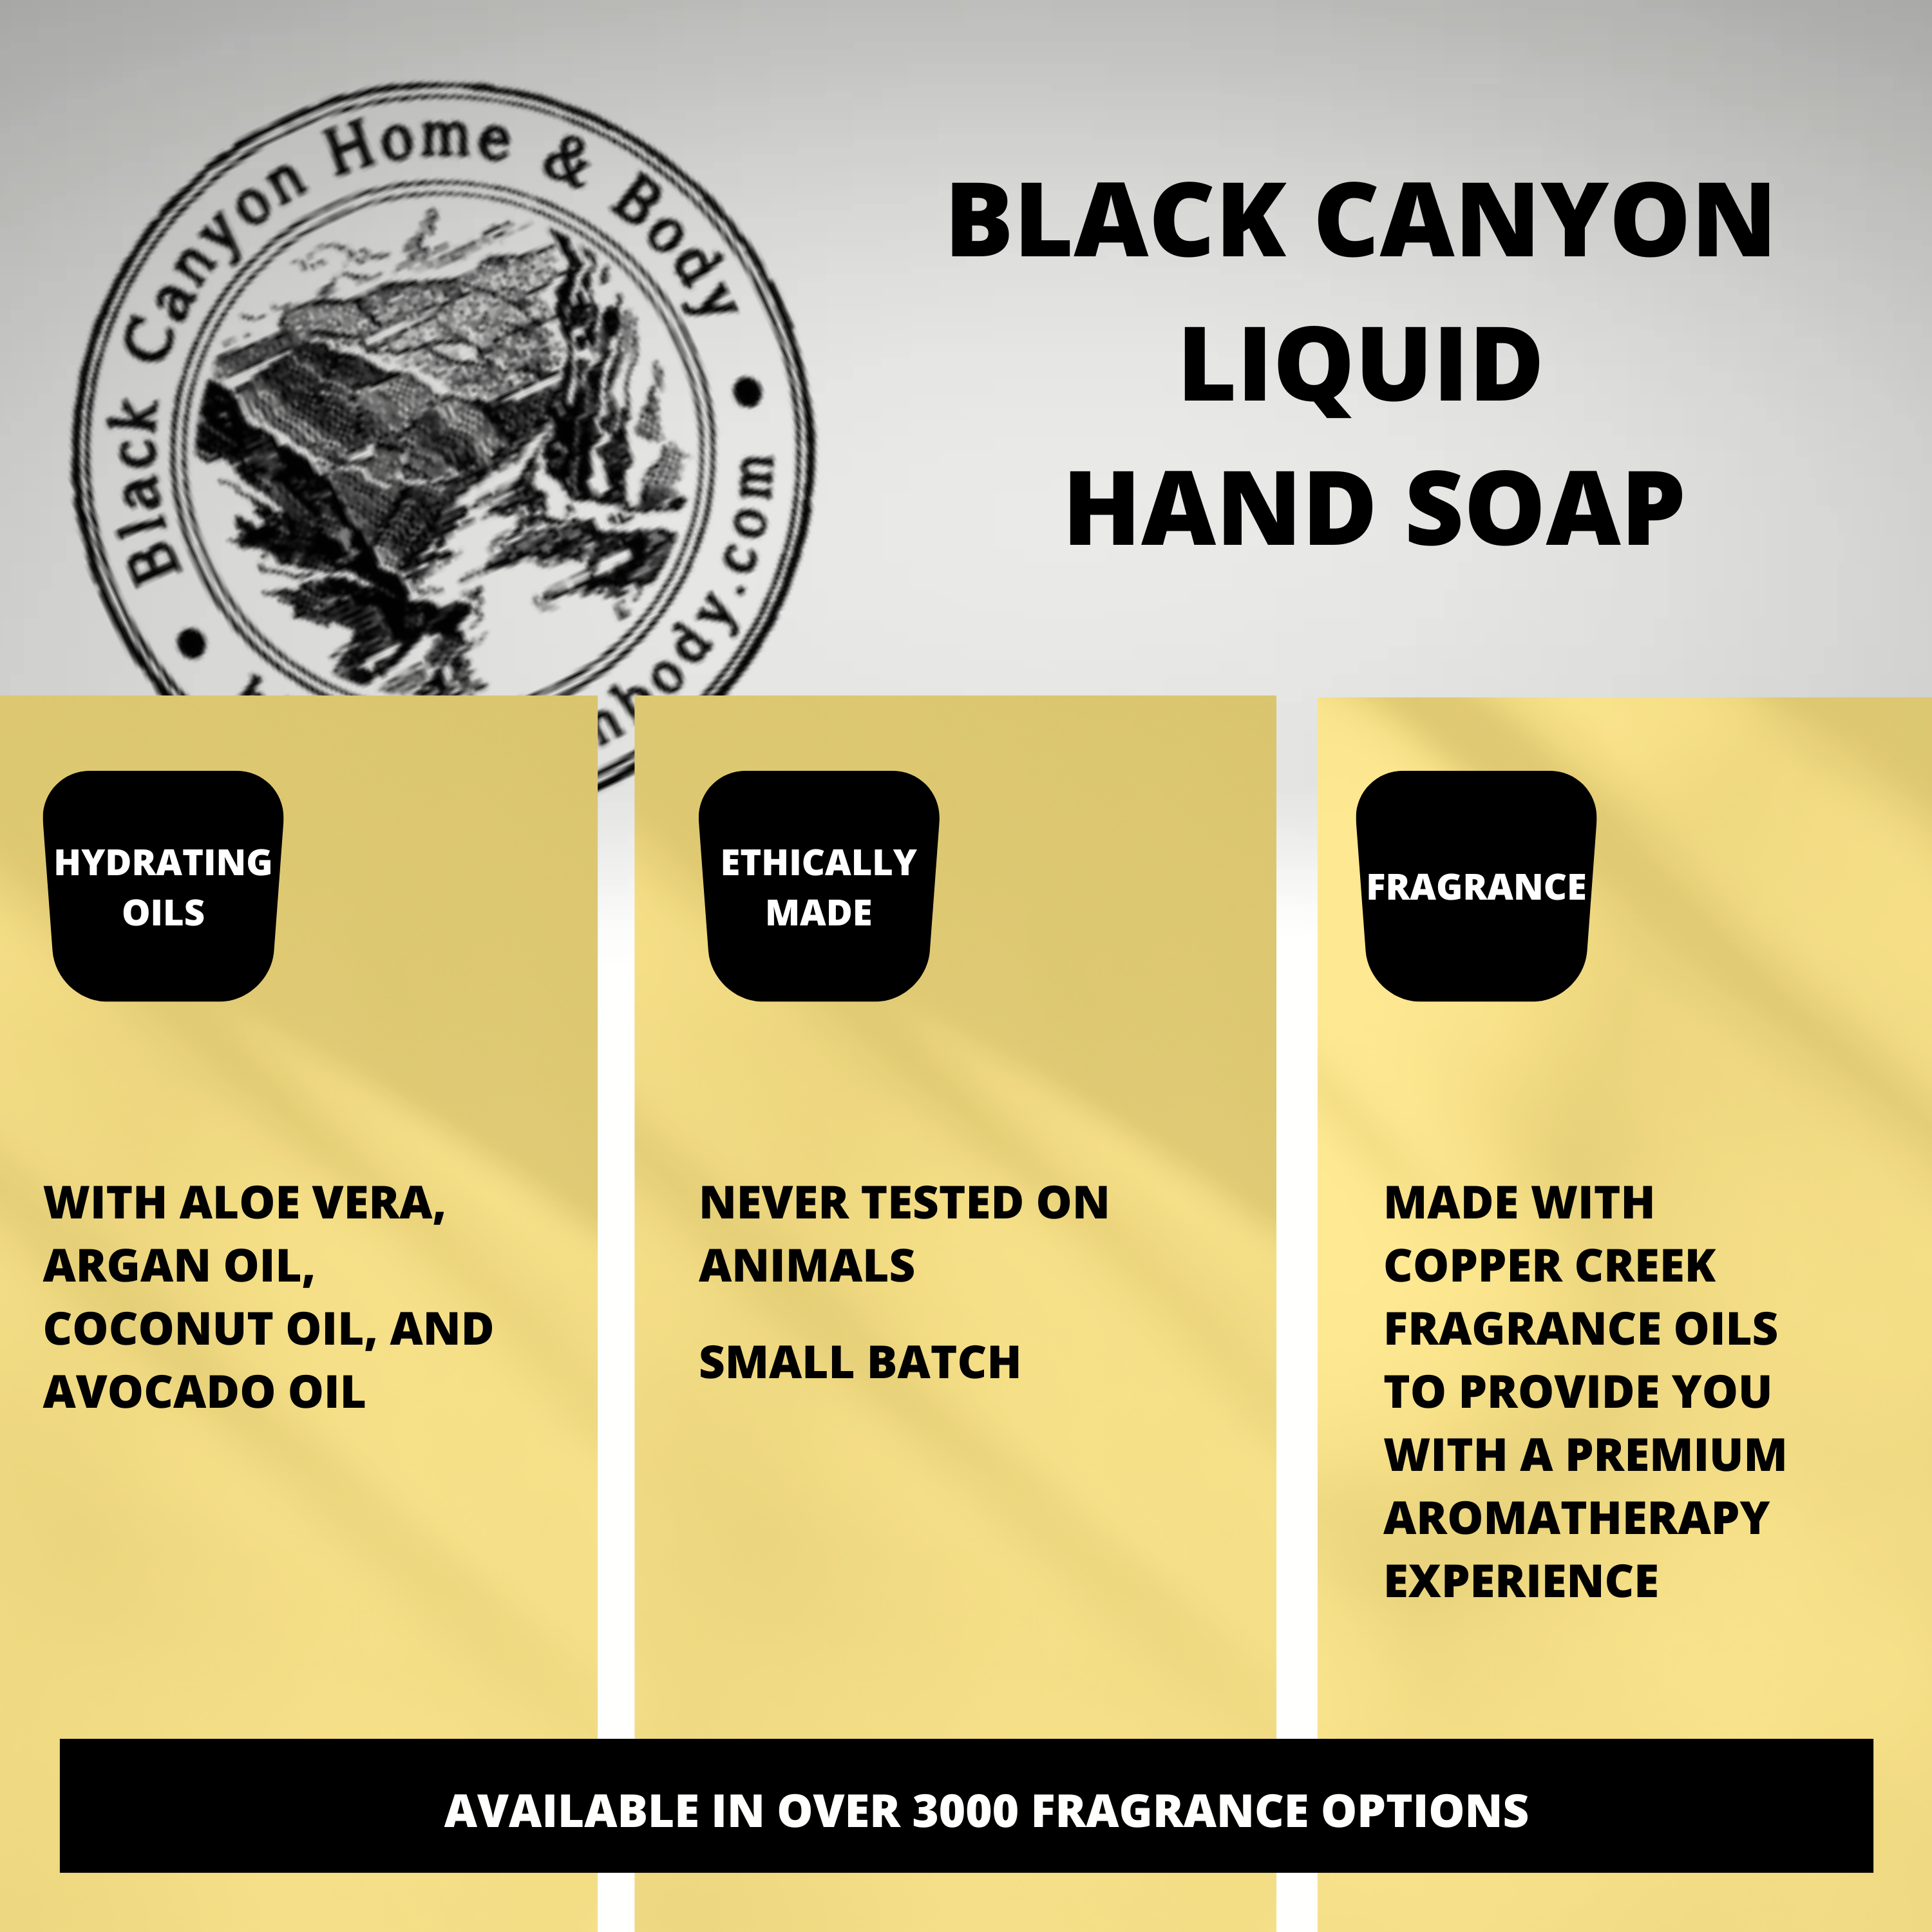 Black Canyon Blackberry Amber Scented Liquid Hand Soap